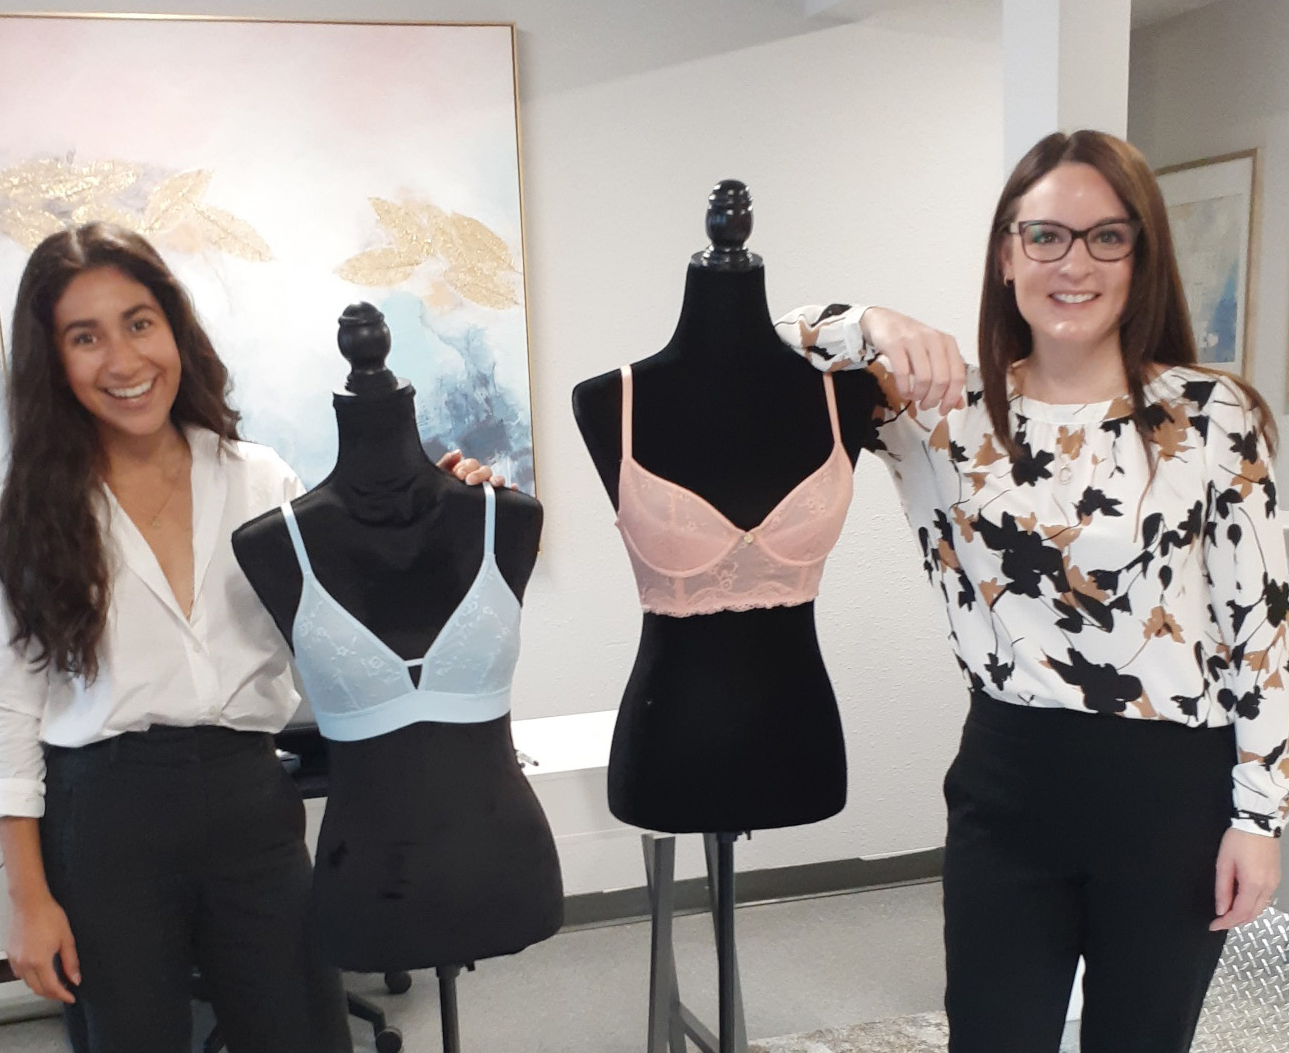 Local Salon encourages students to donate bras 